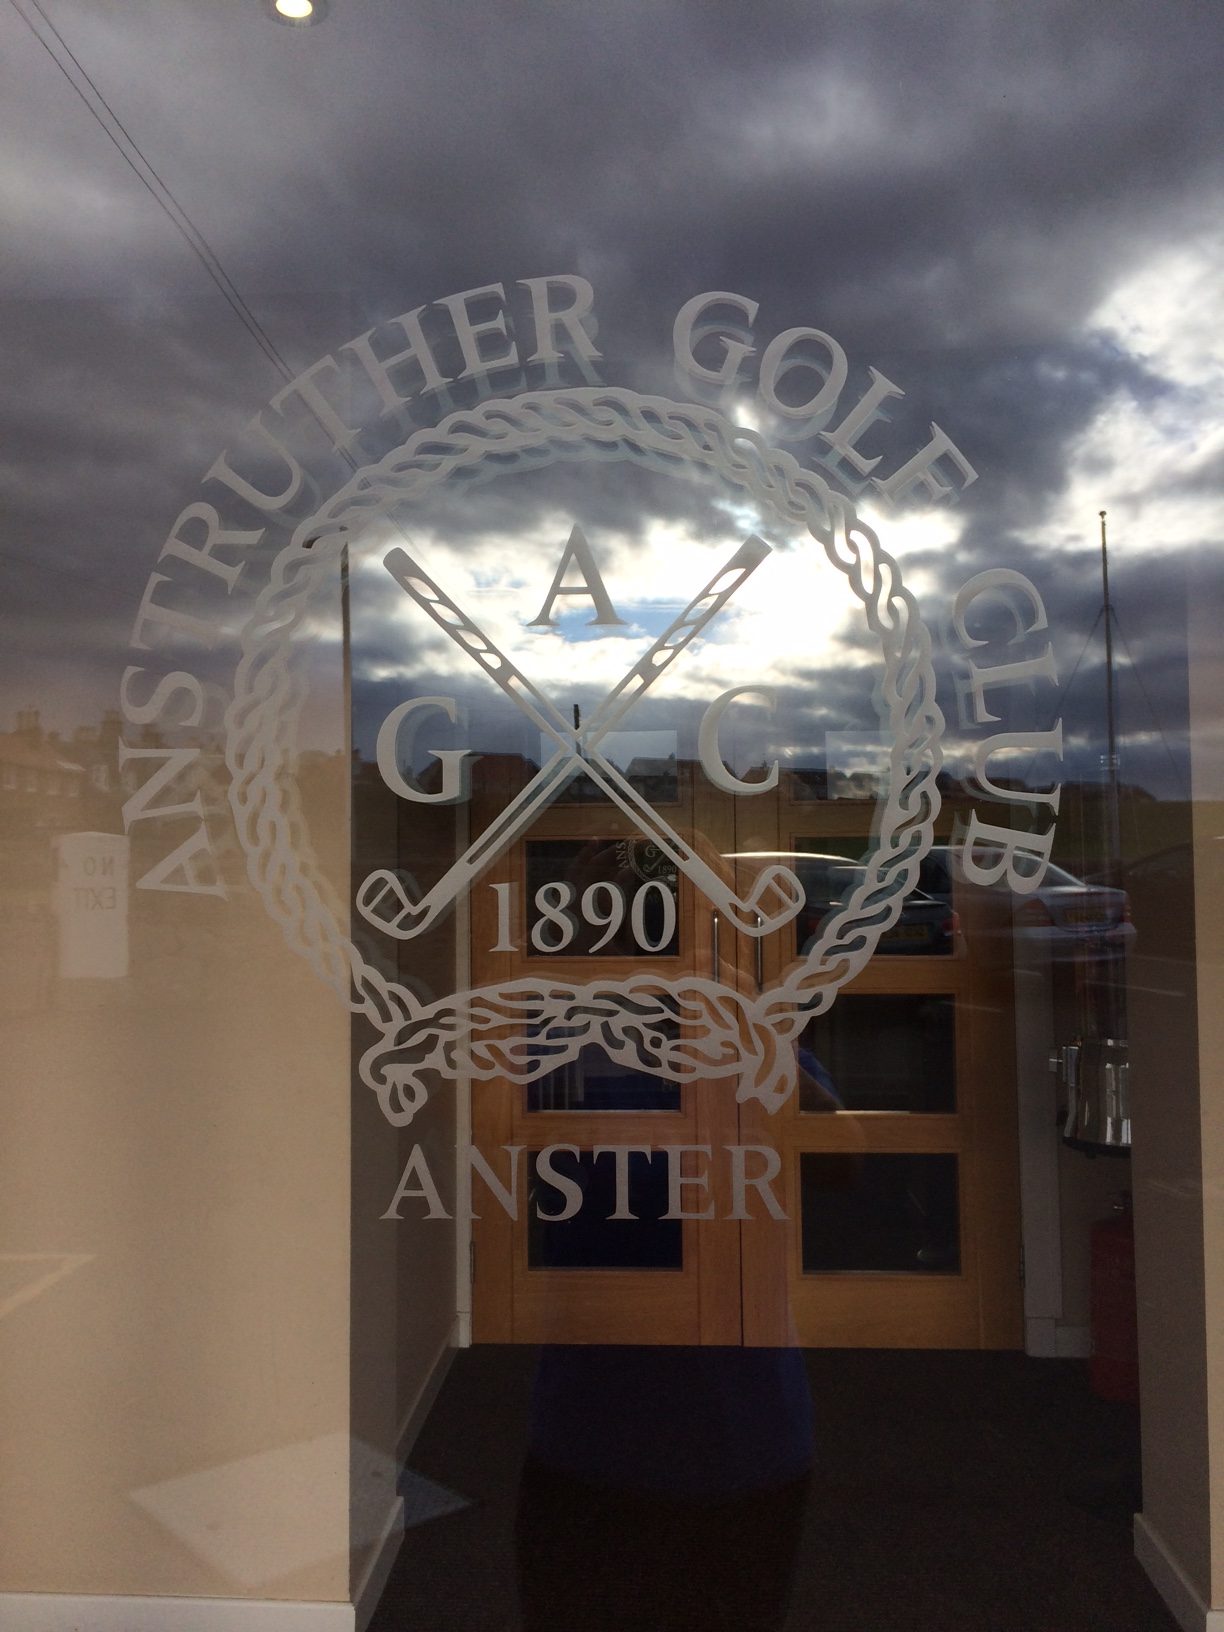 Anstruther golf club logo on the glass clubhouse door